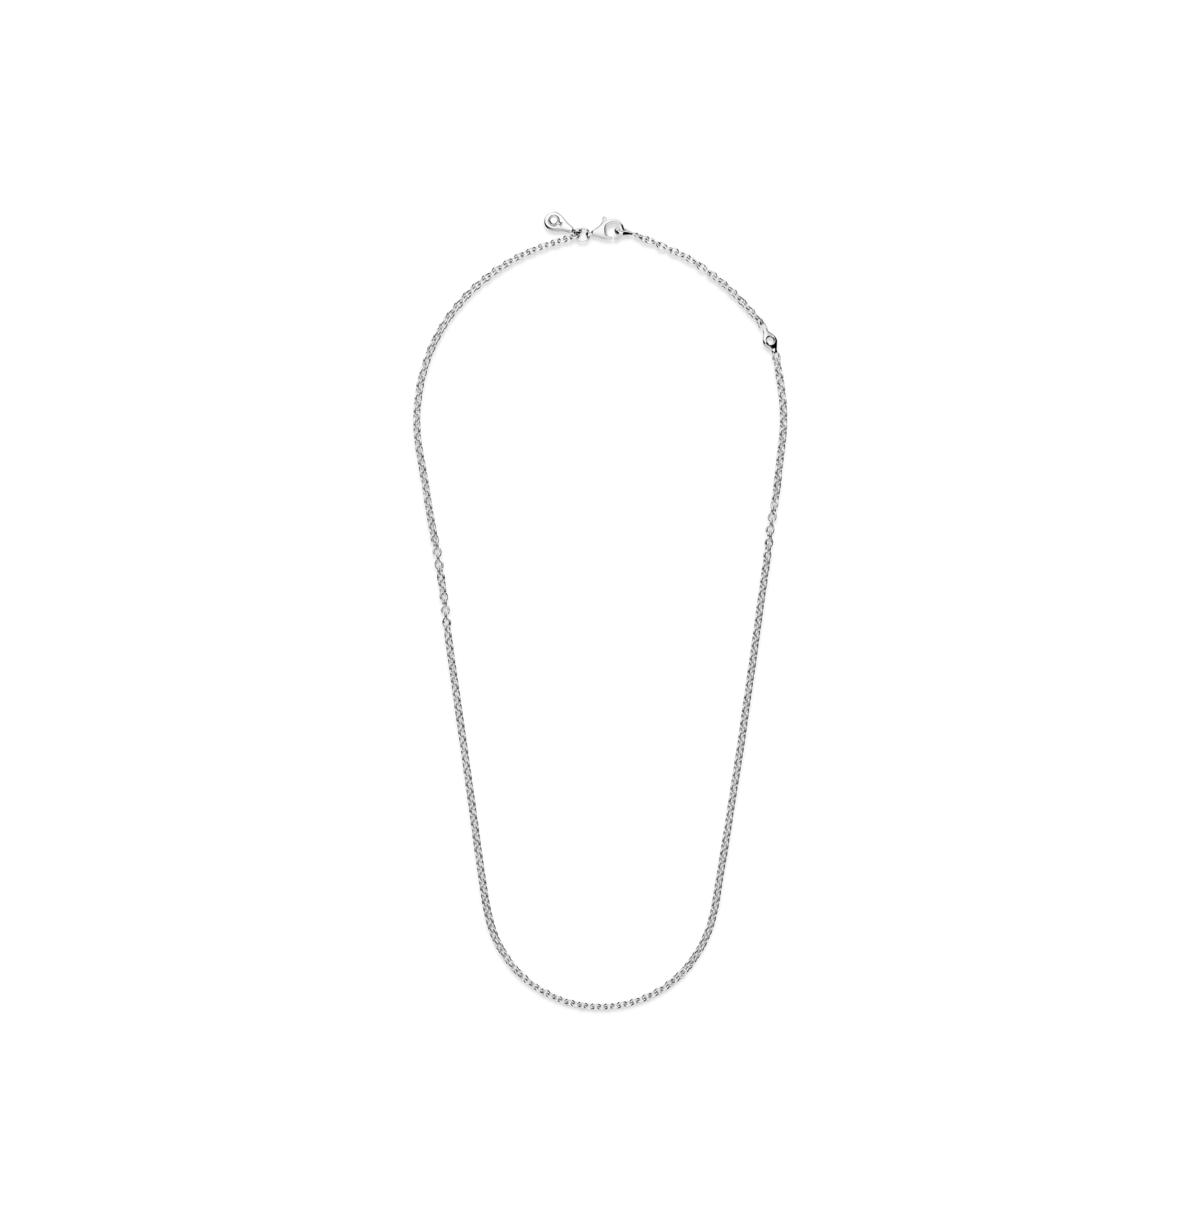 New Sterling Silver 925 Plated Ball 26 Inch Chain Necklaces Clasp Issues |  Necklace clasps, Chains necklace, 925 sterling silver